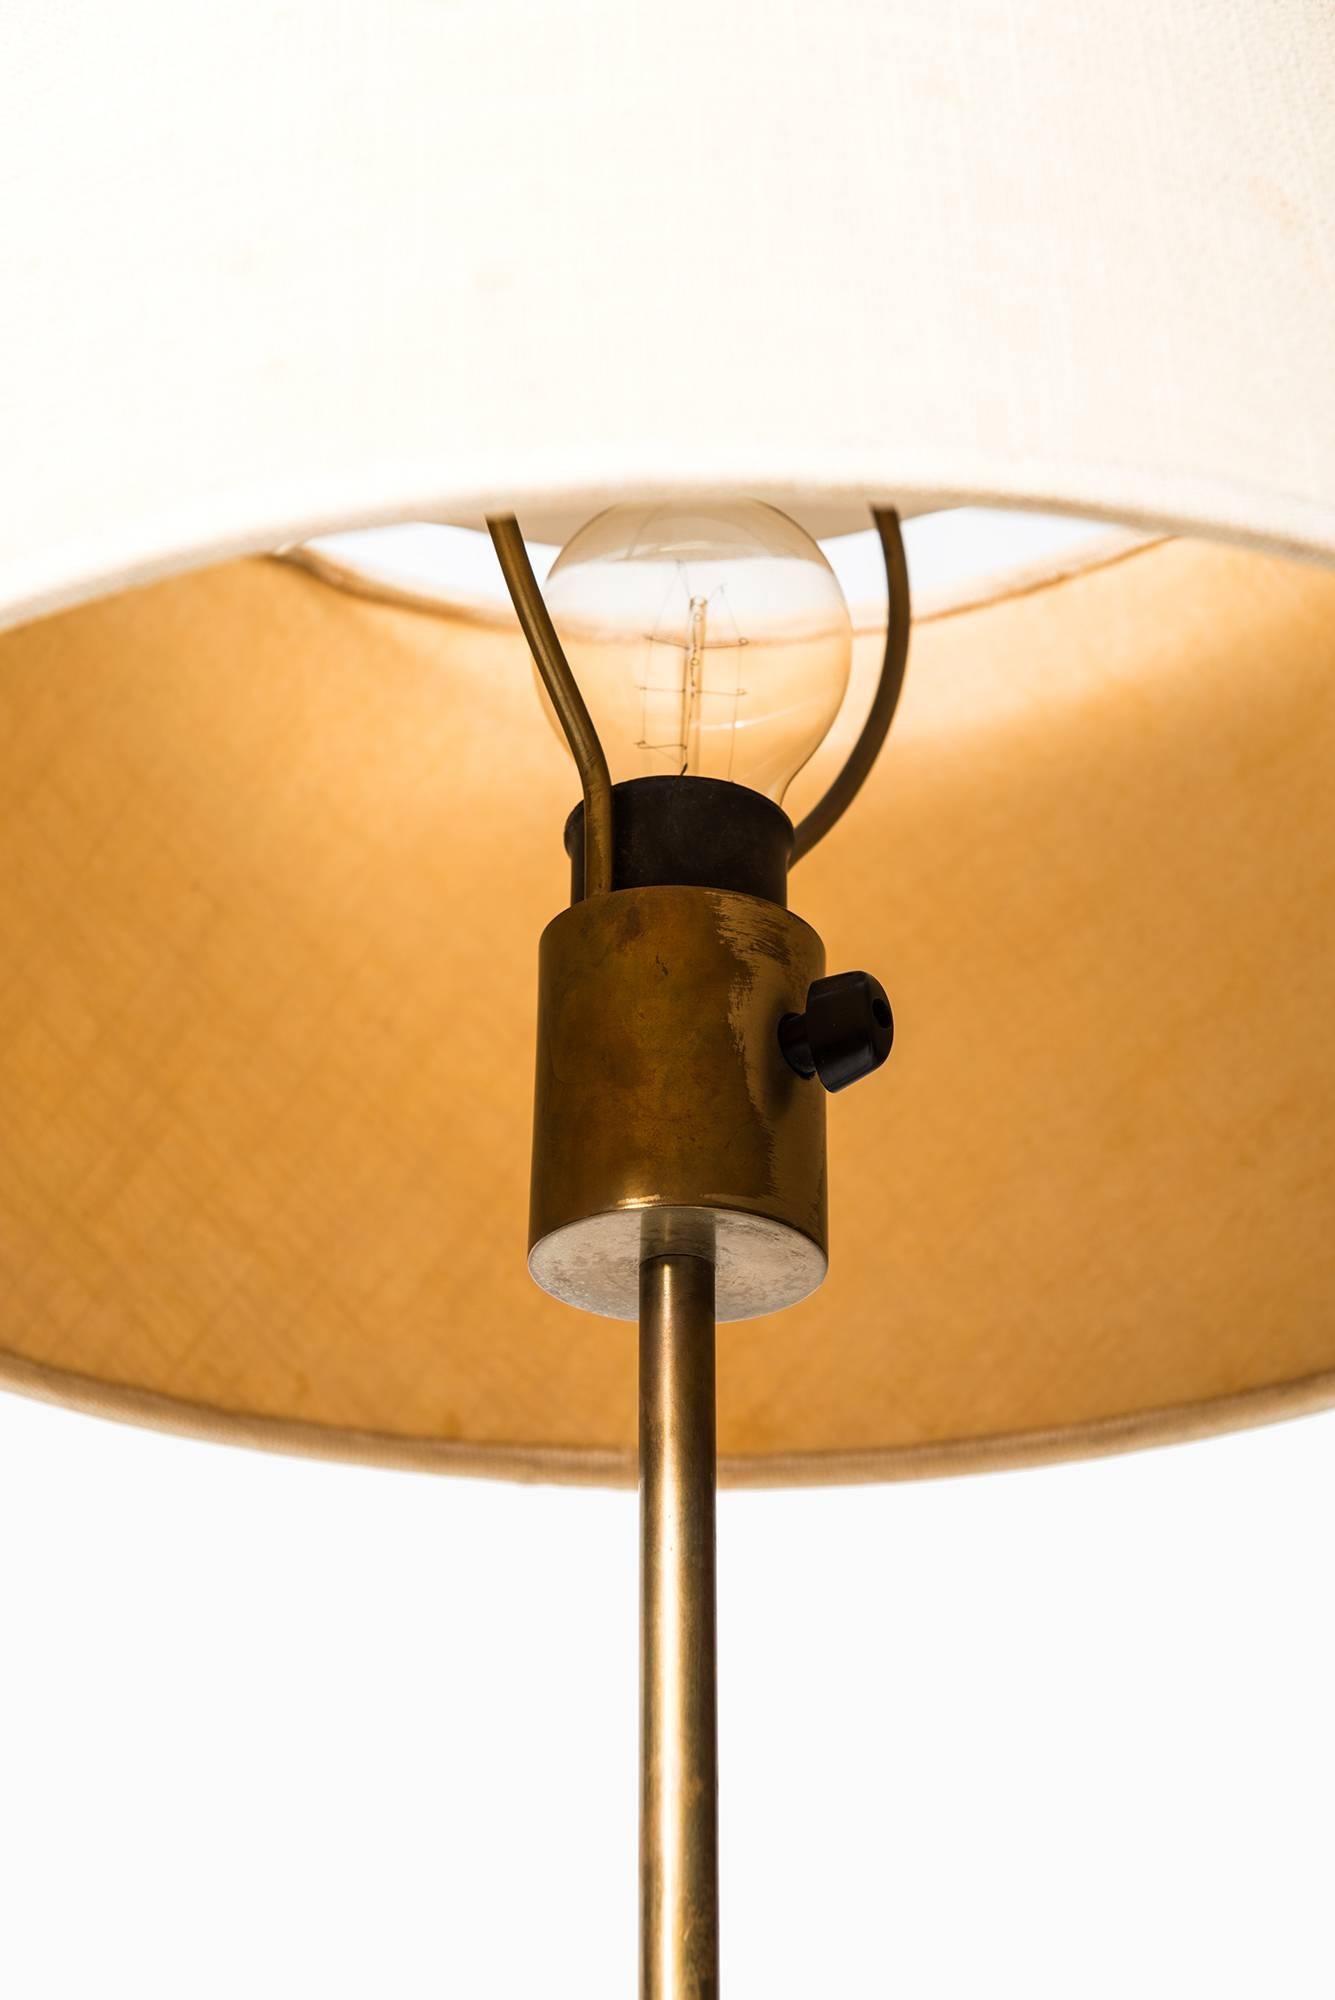 Rare table lamp model B-31 designed by Yasha Hiefetz. Produced by Bergbom in Sweden.